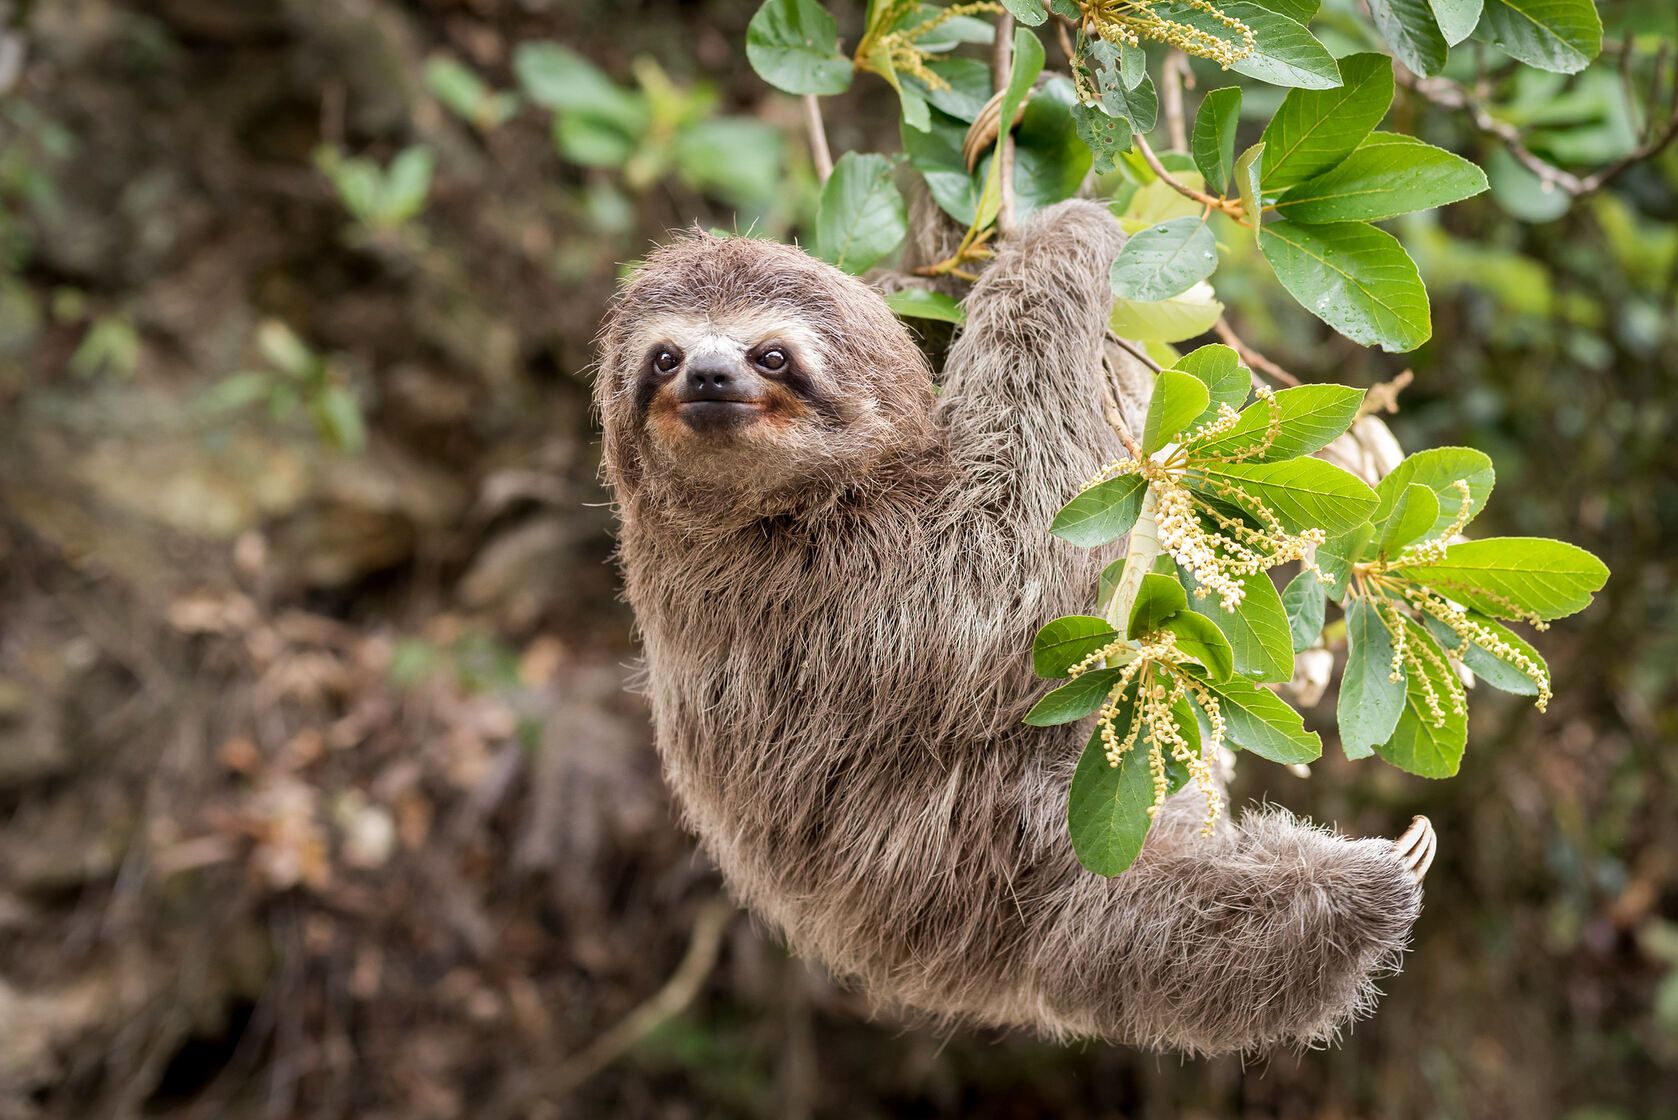 What Is The Slowest Animal In The World? All About Sloths! | Kidadl